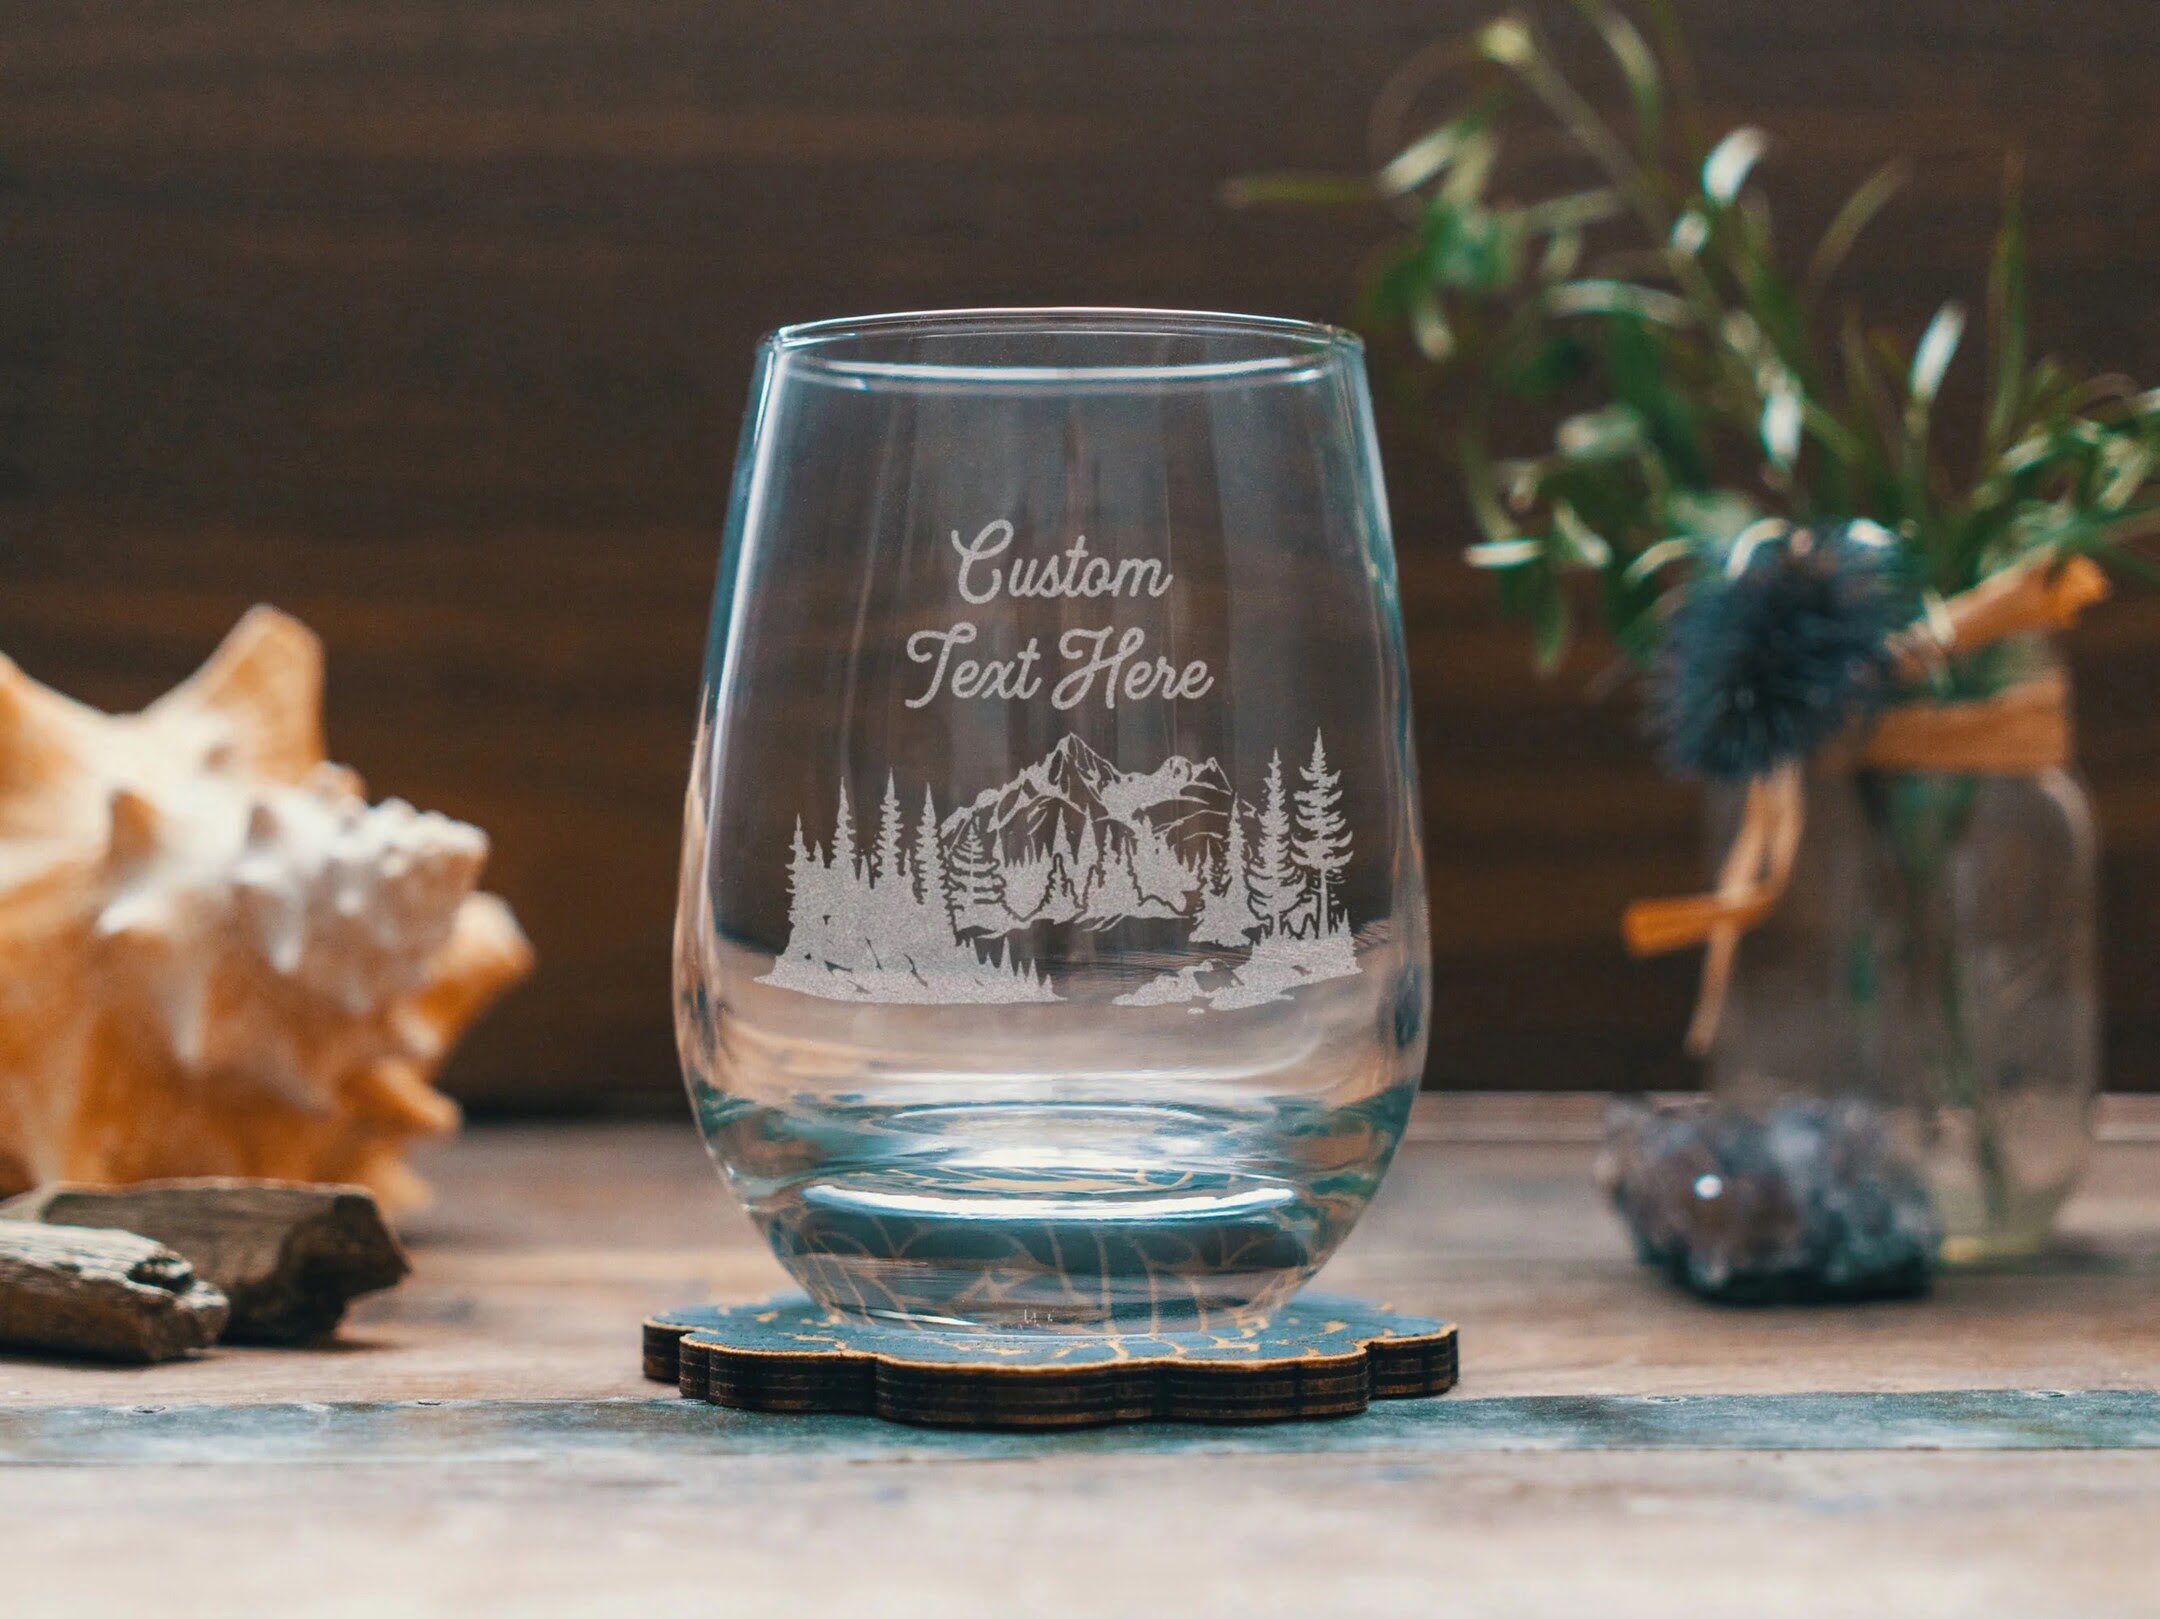 How To Customize Glassware